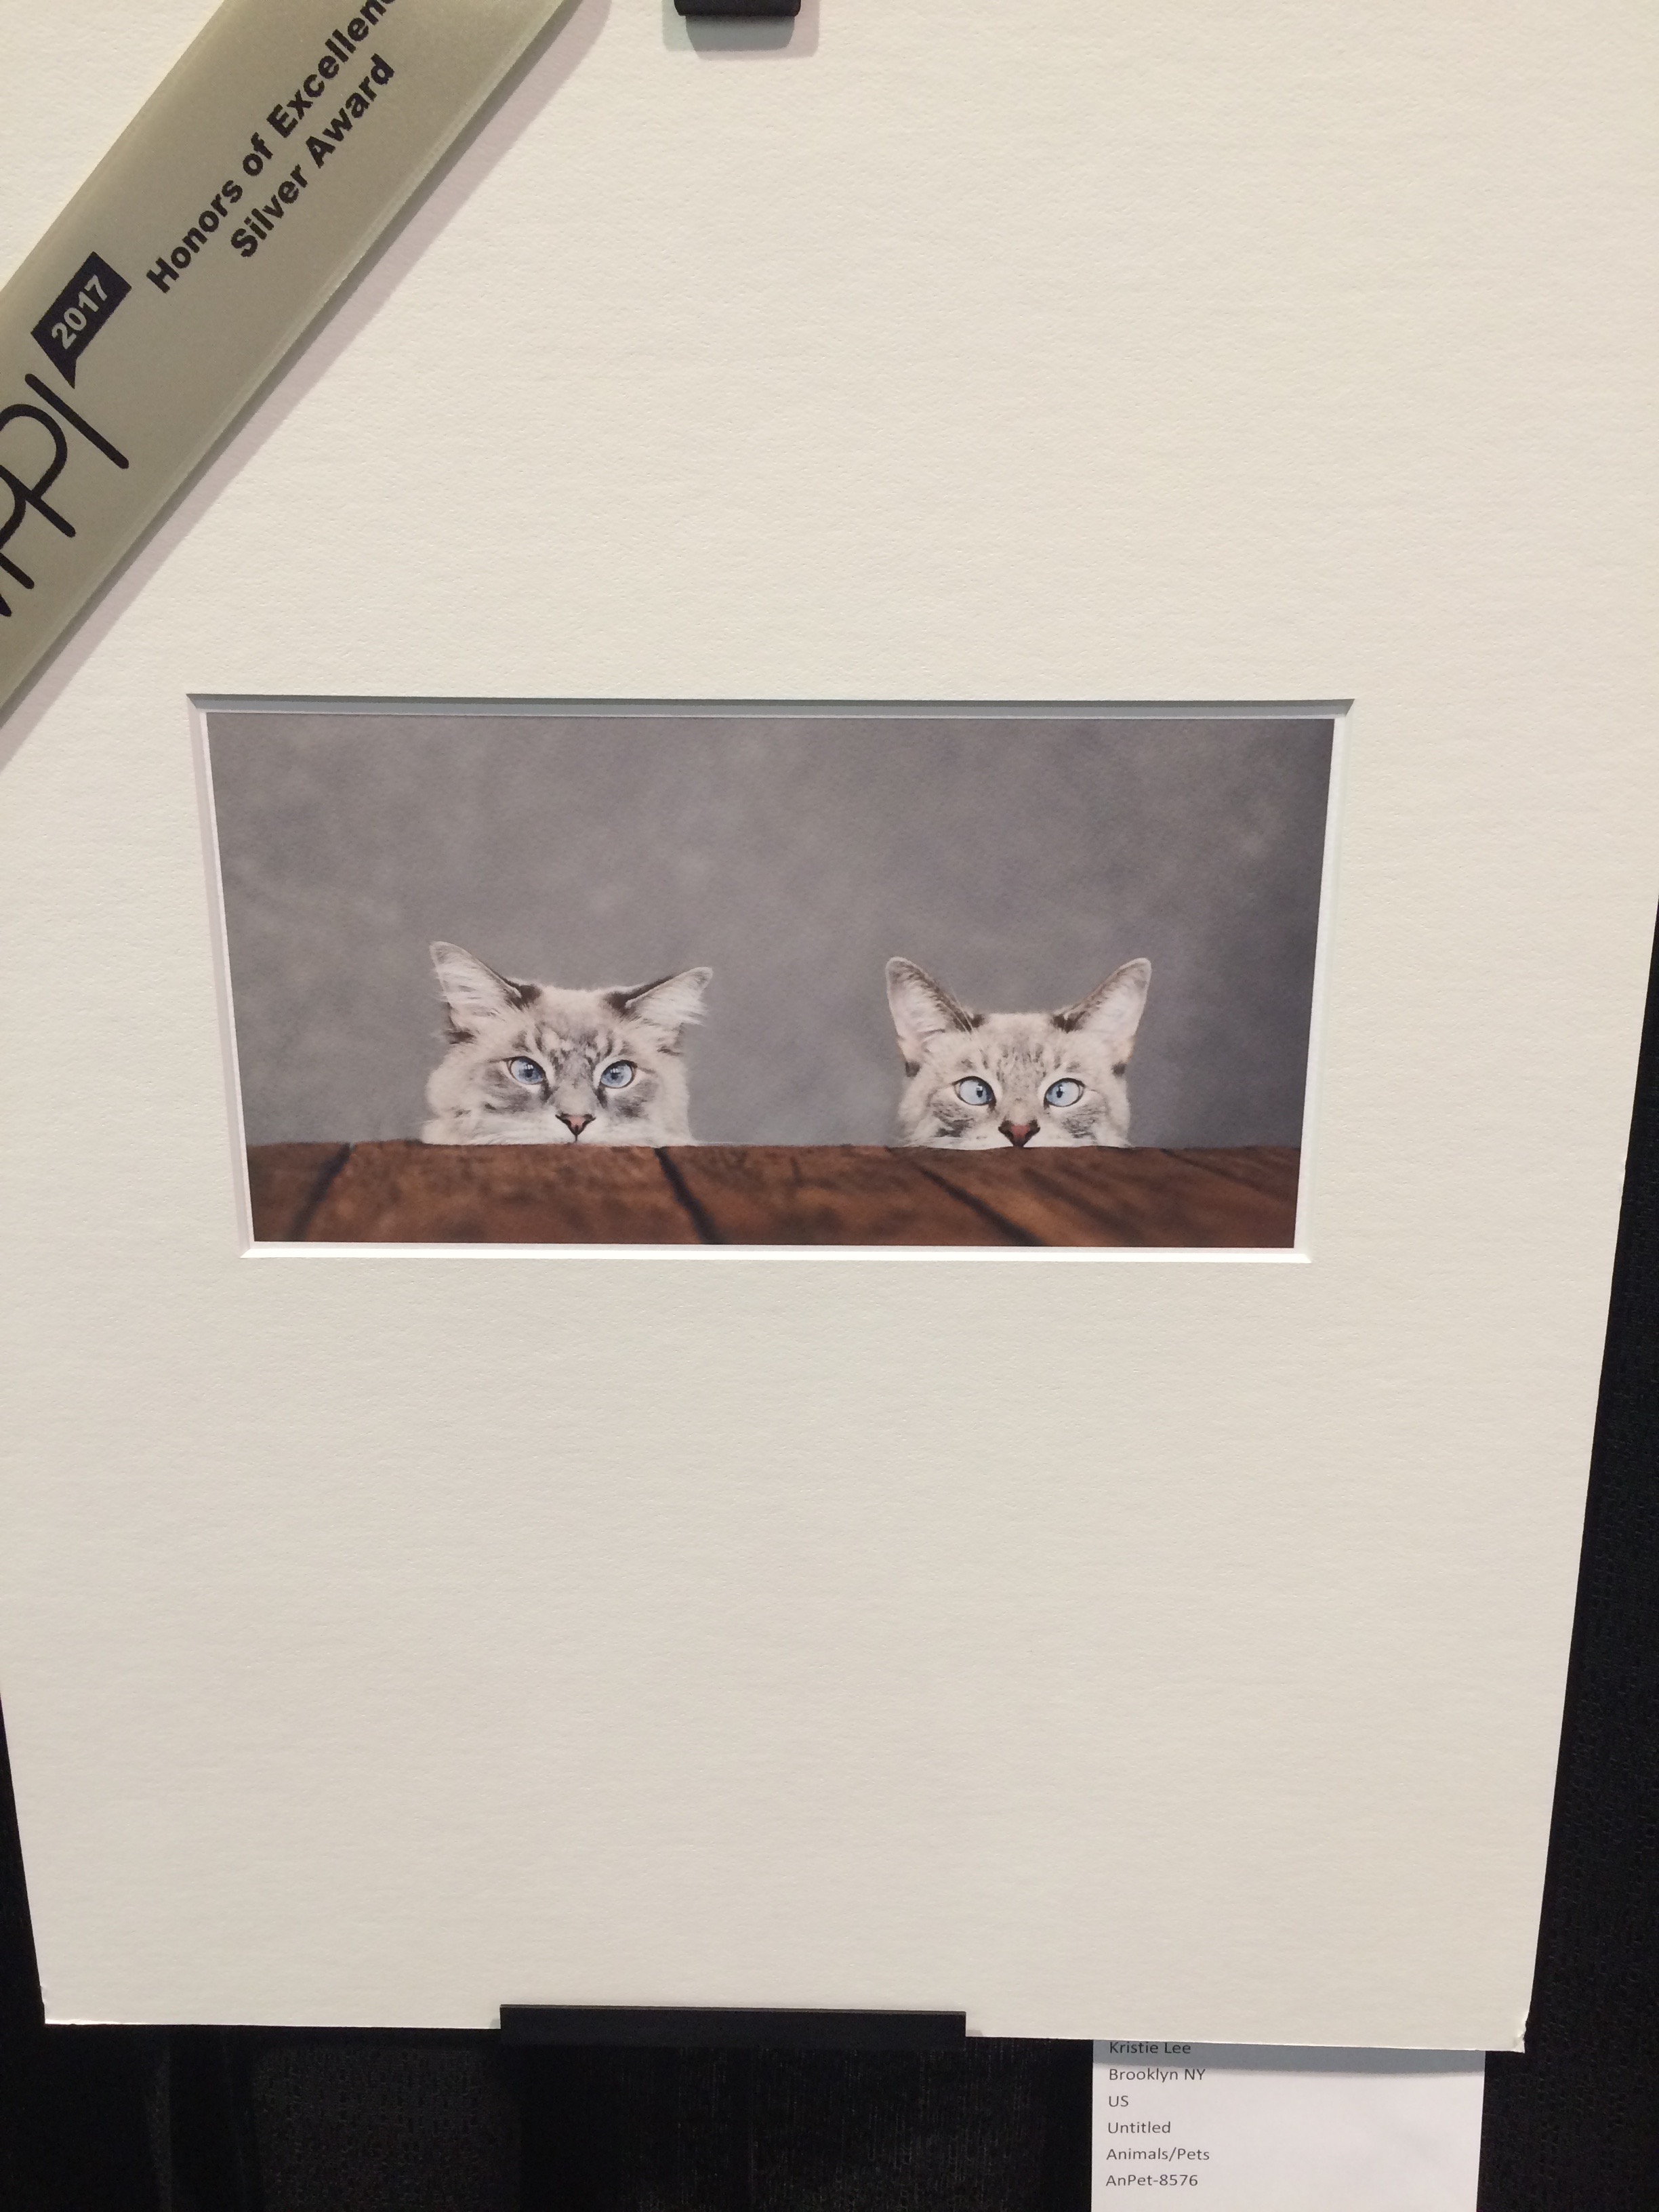 It's not all wedding and portrait photography at the Expo - there were even cat prints!